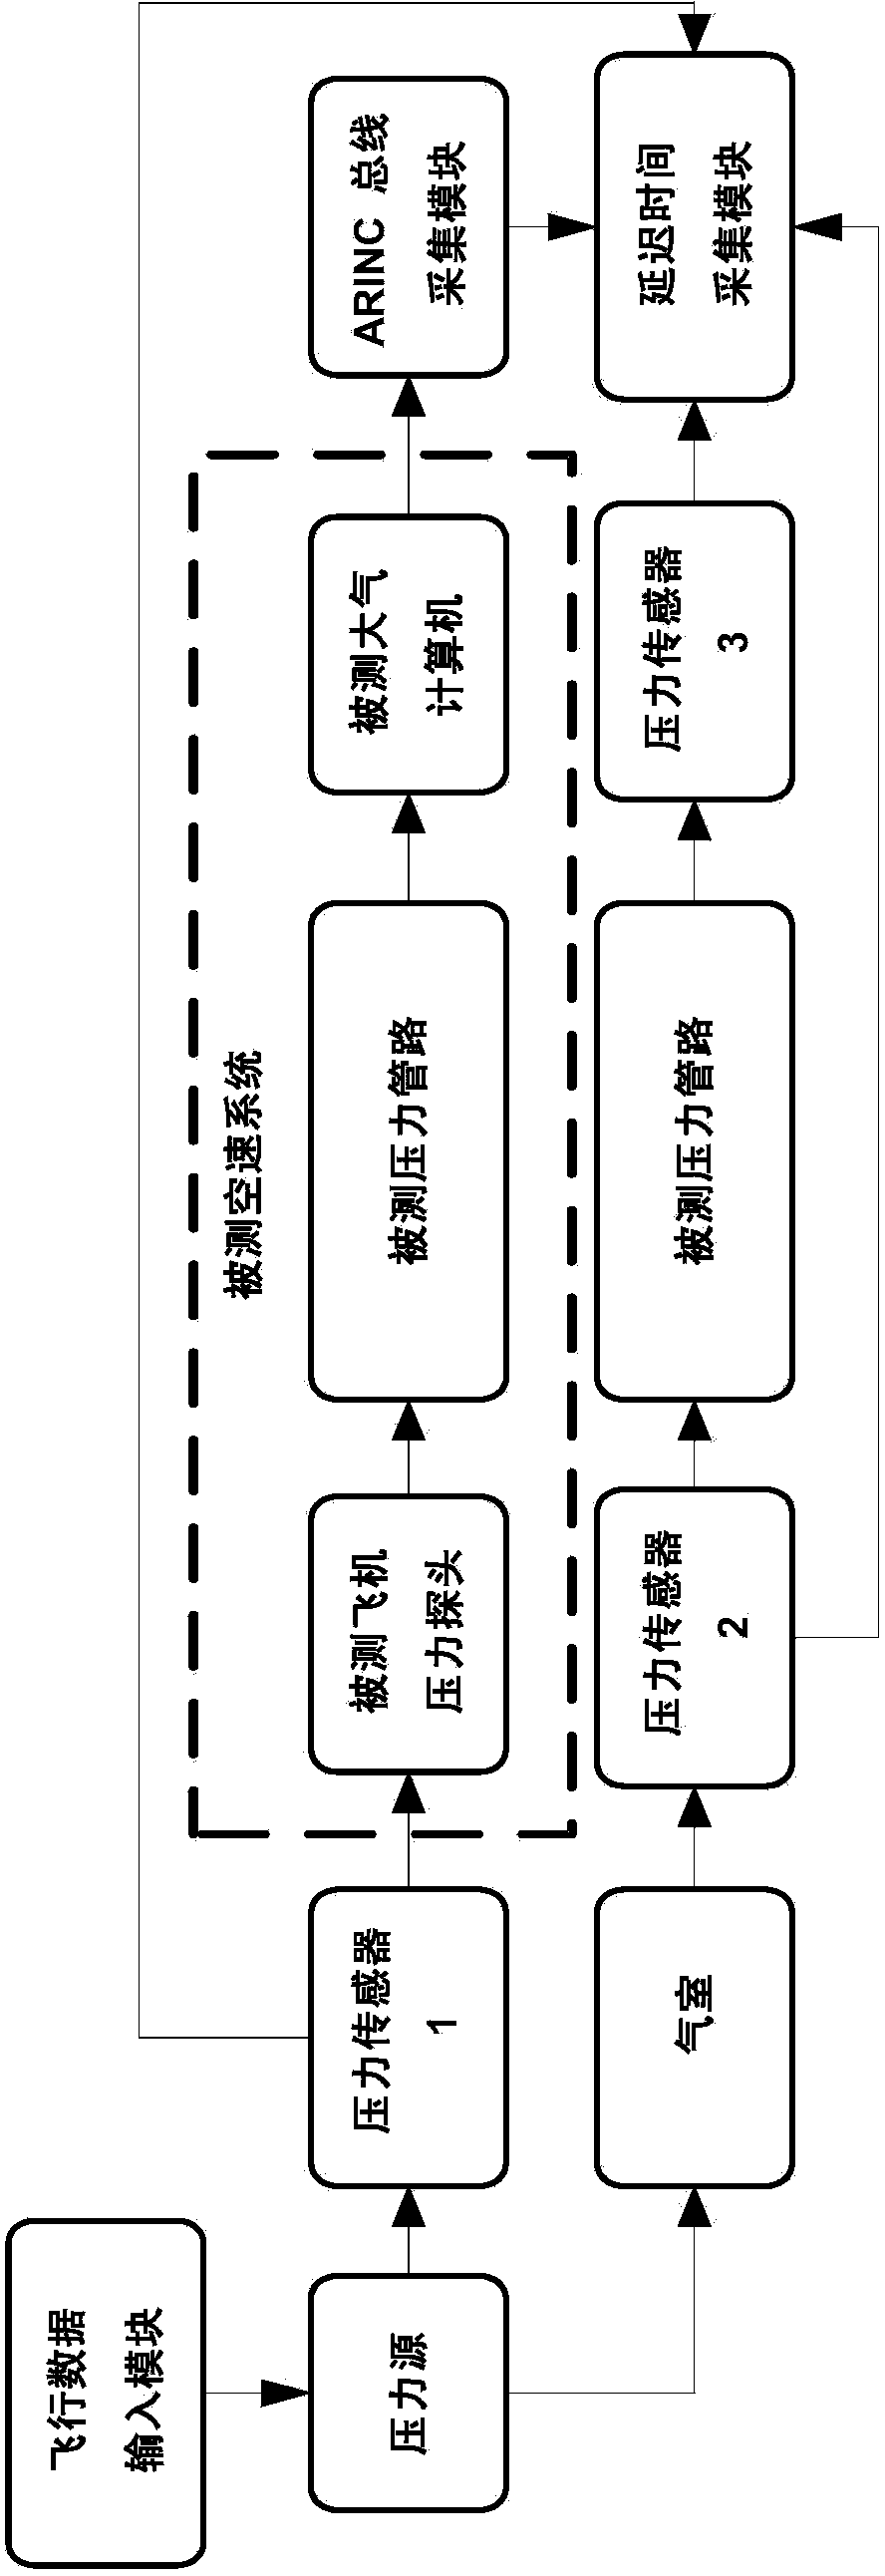 Measuring device for lag time of airplane airspeed system